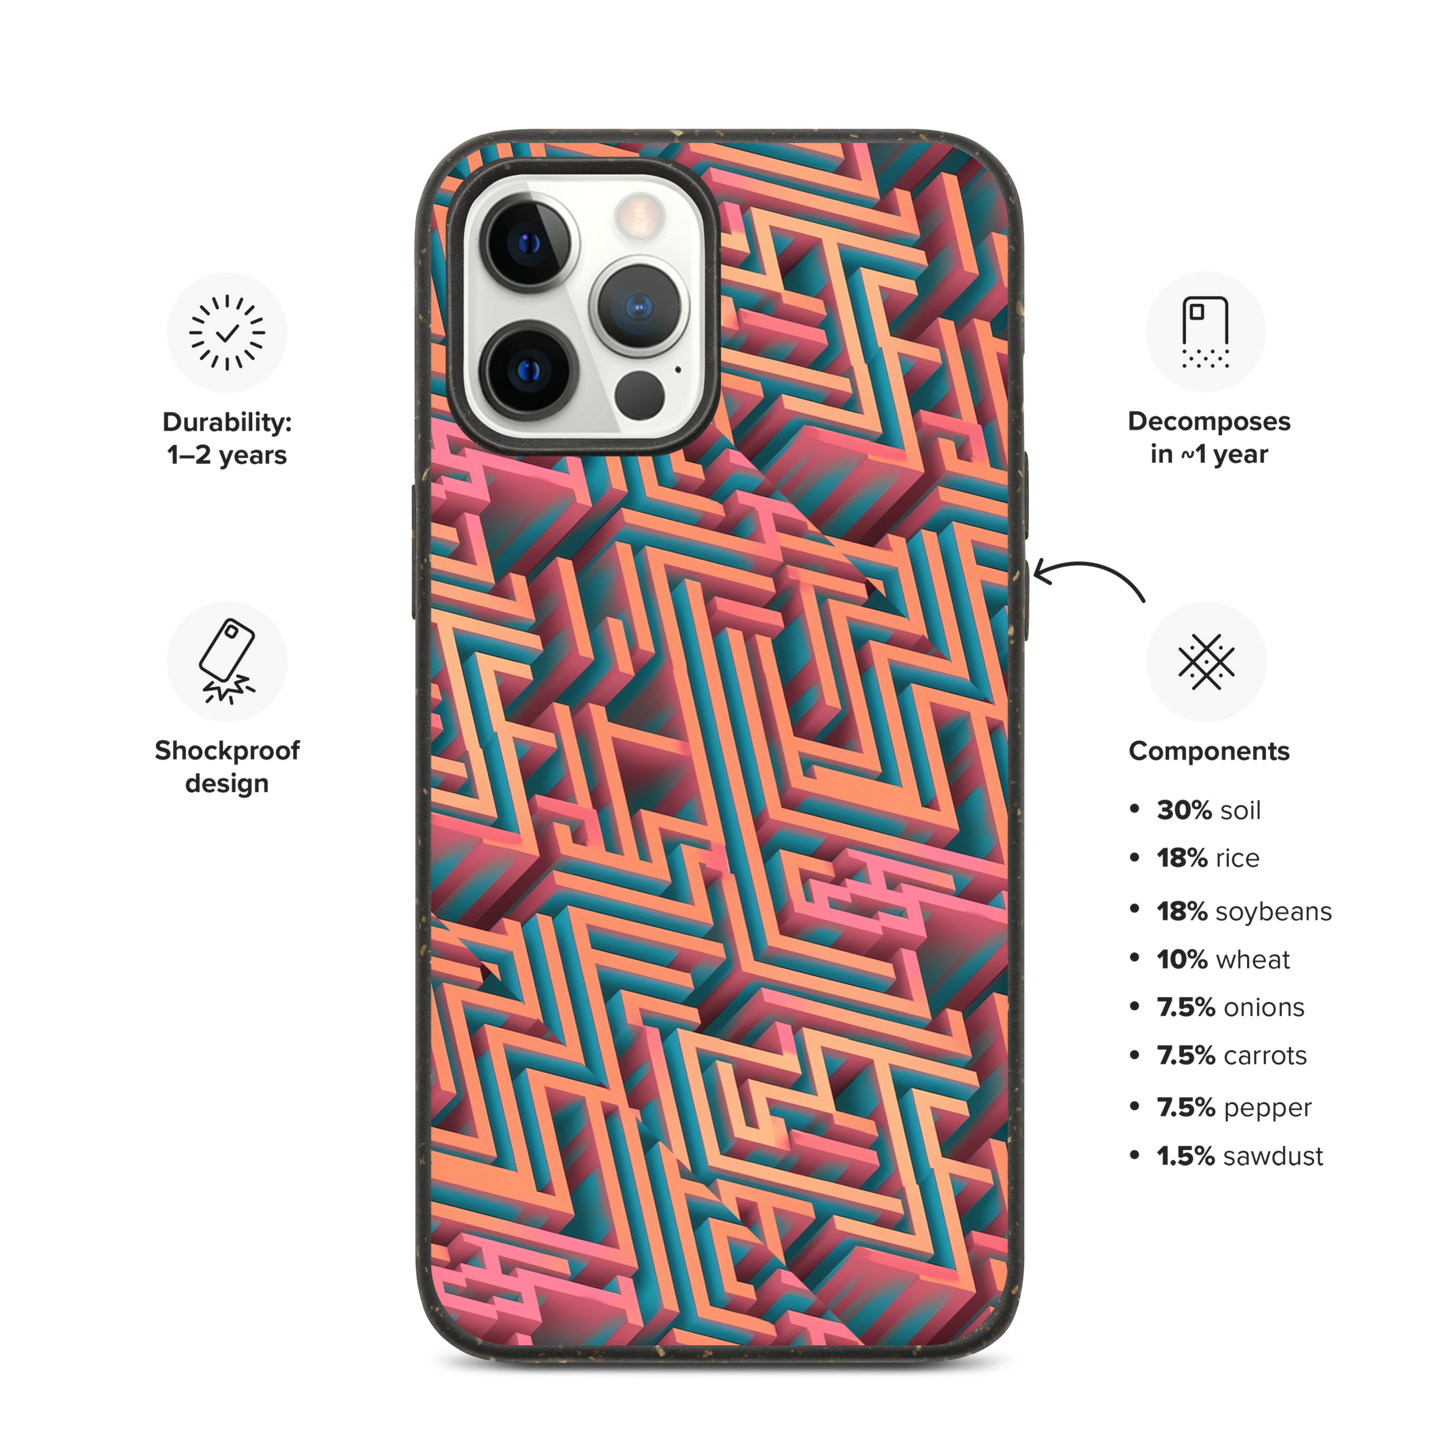 3D Maze Illusion | 3D Patterns | Speckled Case for iPhone - #1